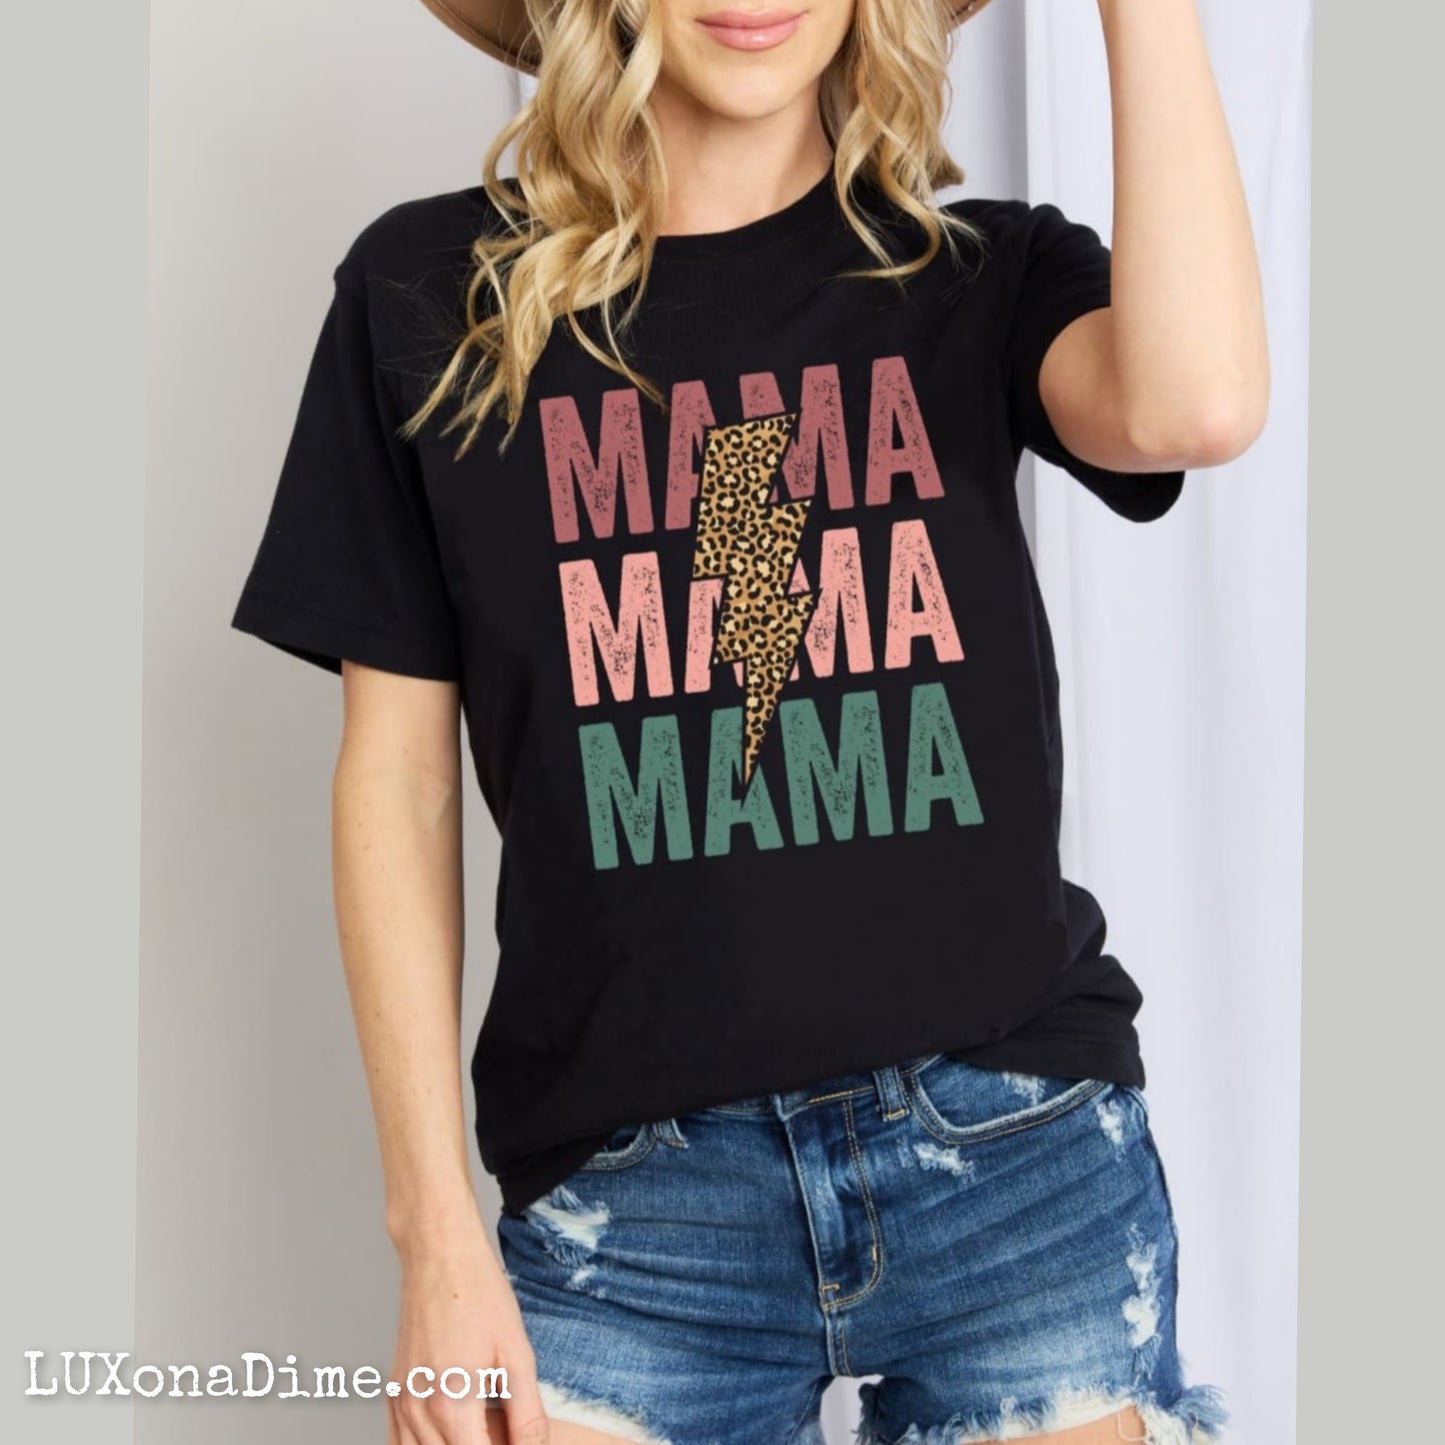 Leopard MAMA Colorful Graphic 100% Cotton Short-sleeve Tee Shirt